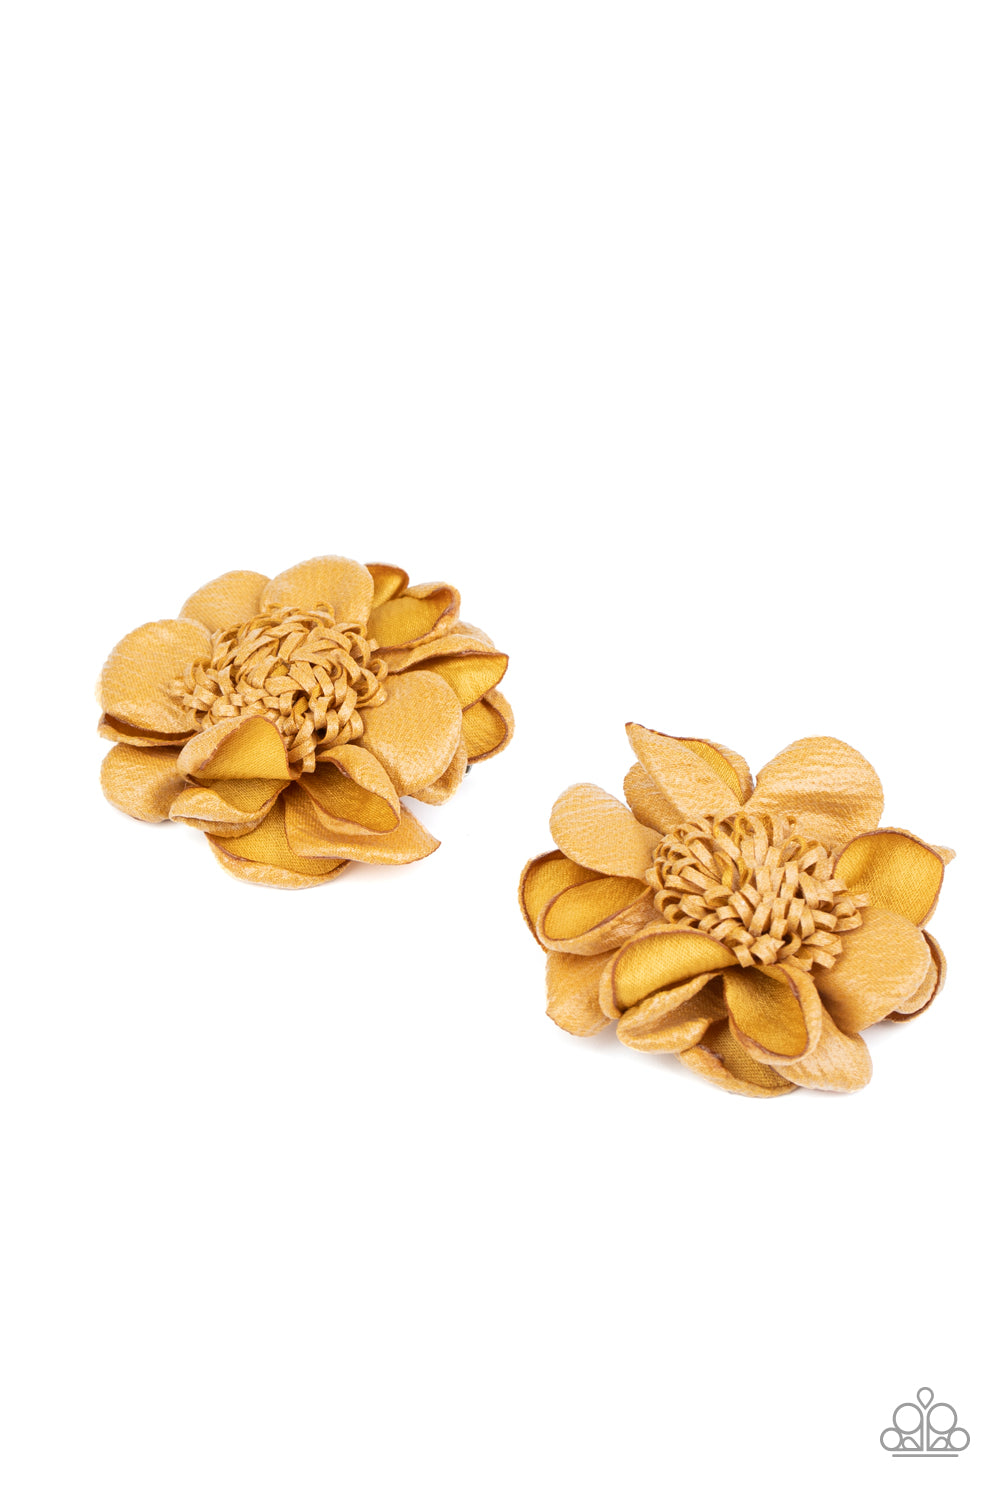 Full On Floral - Yellow Flower Hair Clips - Princess Glam Shop